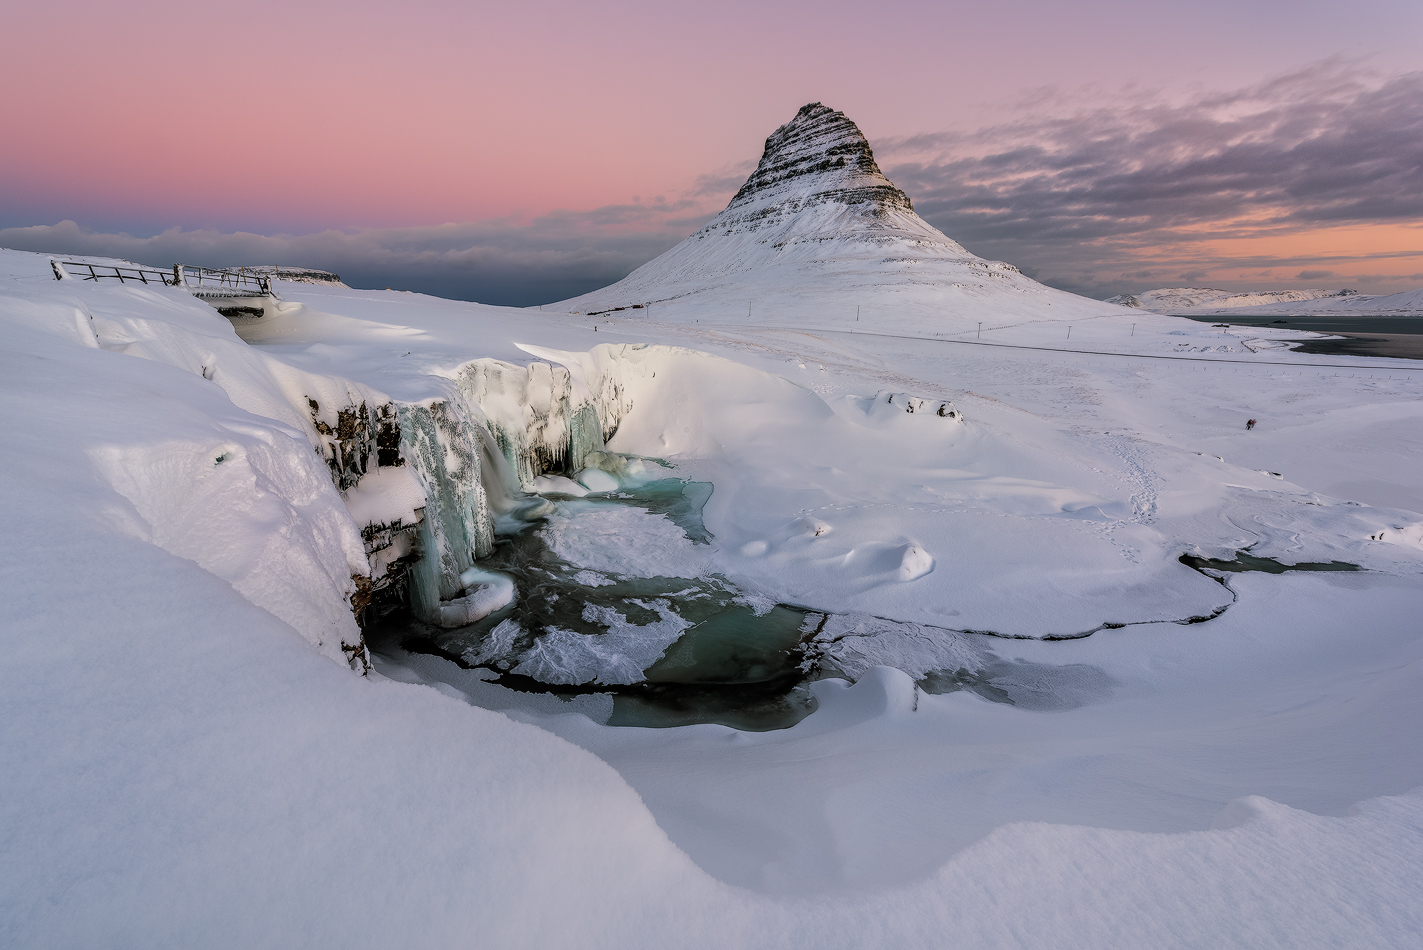 The beautiful Kirkjufell mountain is referred to as 'Church mountain' thanks to its unique shape.